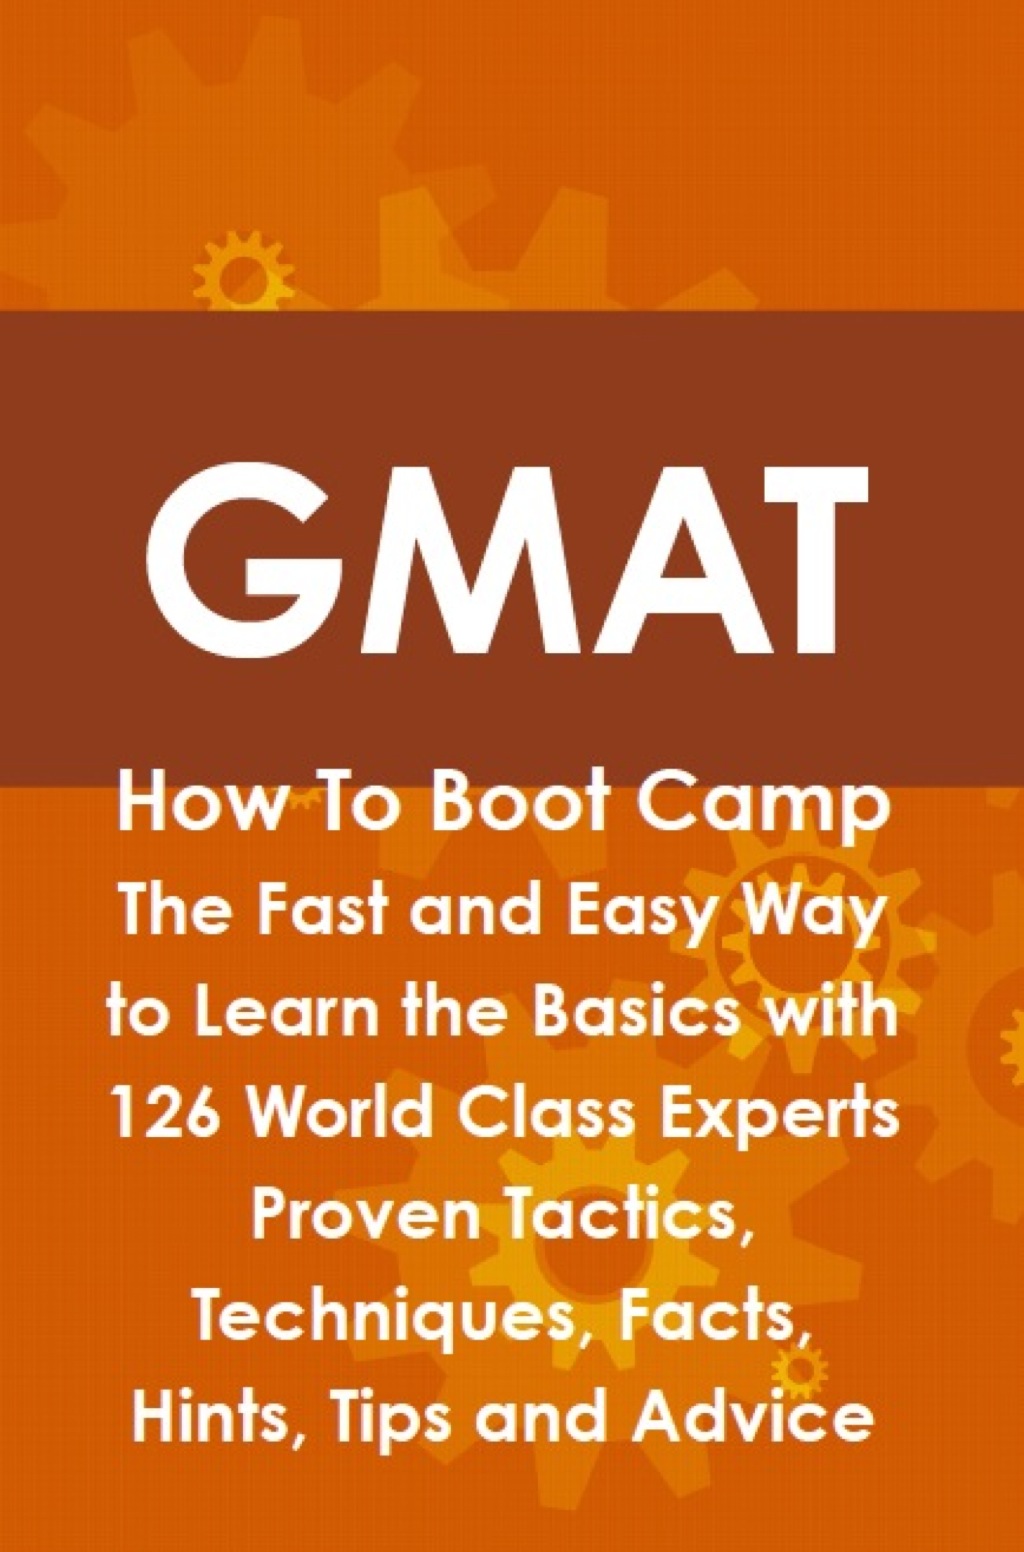 GMAT How To Boot Camp: The Fast and Easy Way to Learn the Basics with 126 World Class Experts Proven Tactics  Techniques  (eBook) - Jim Craig,